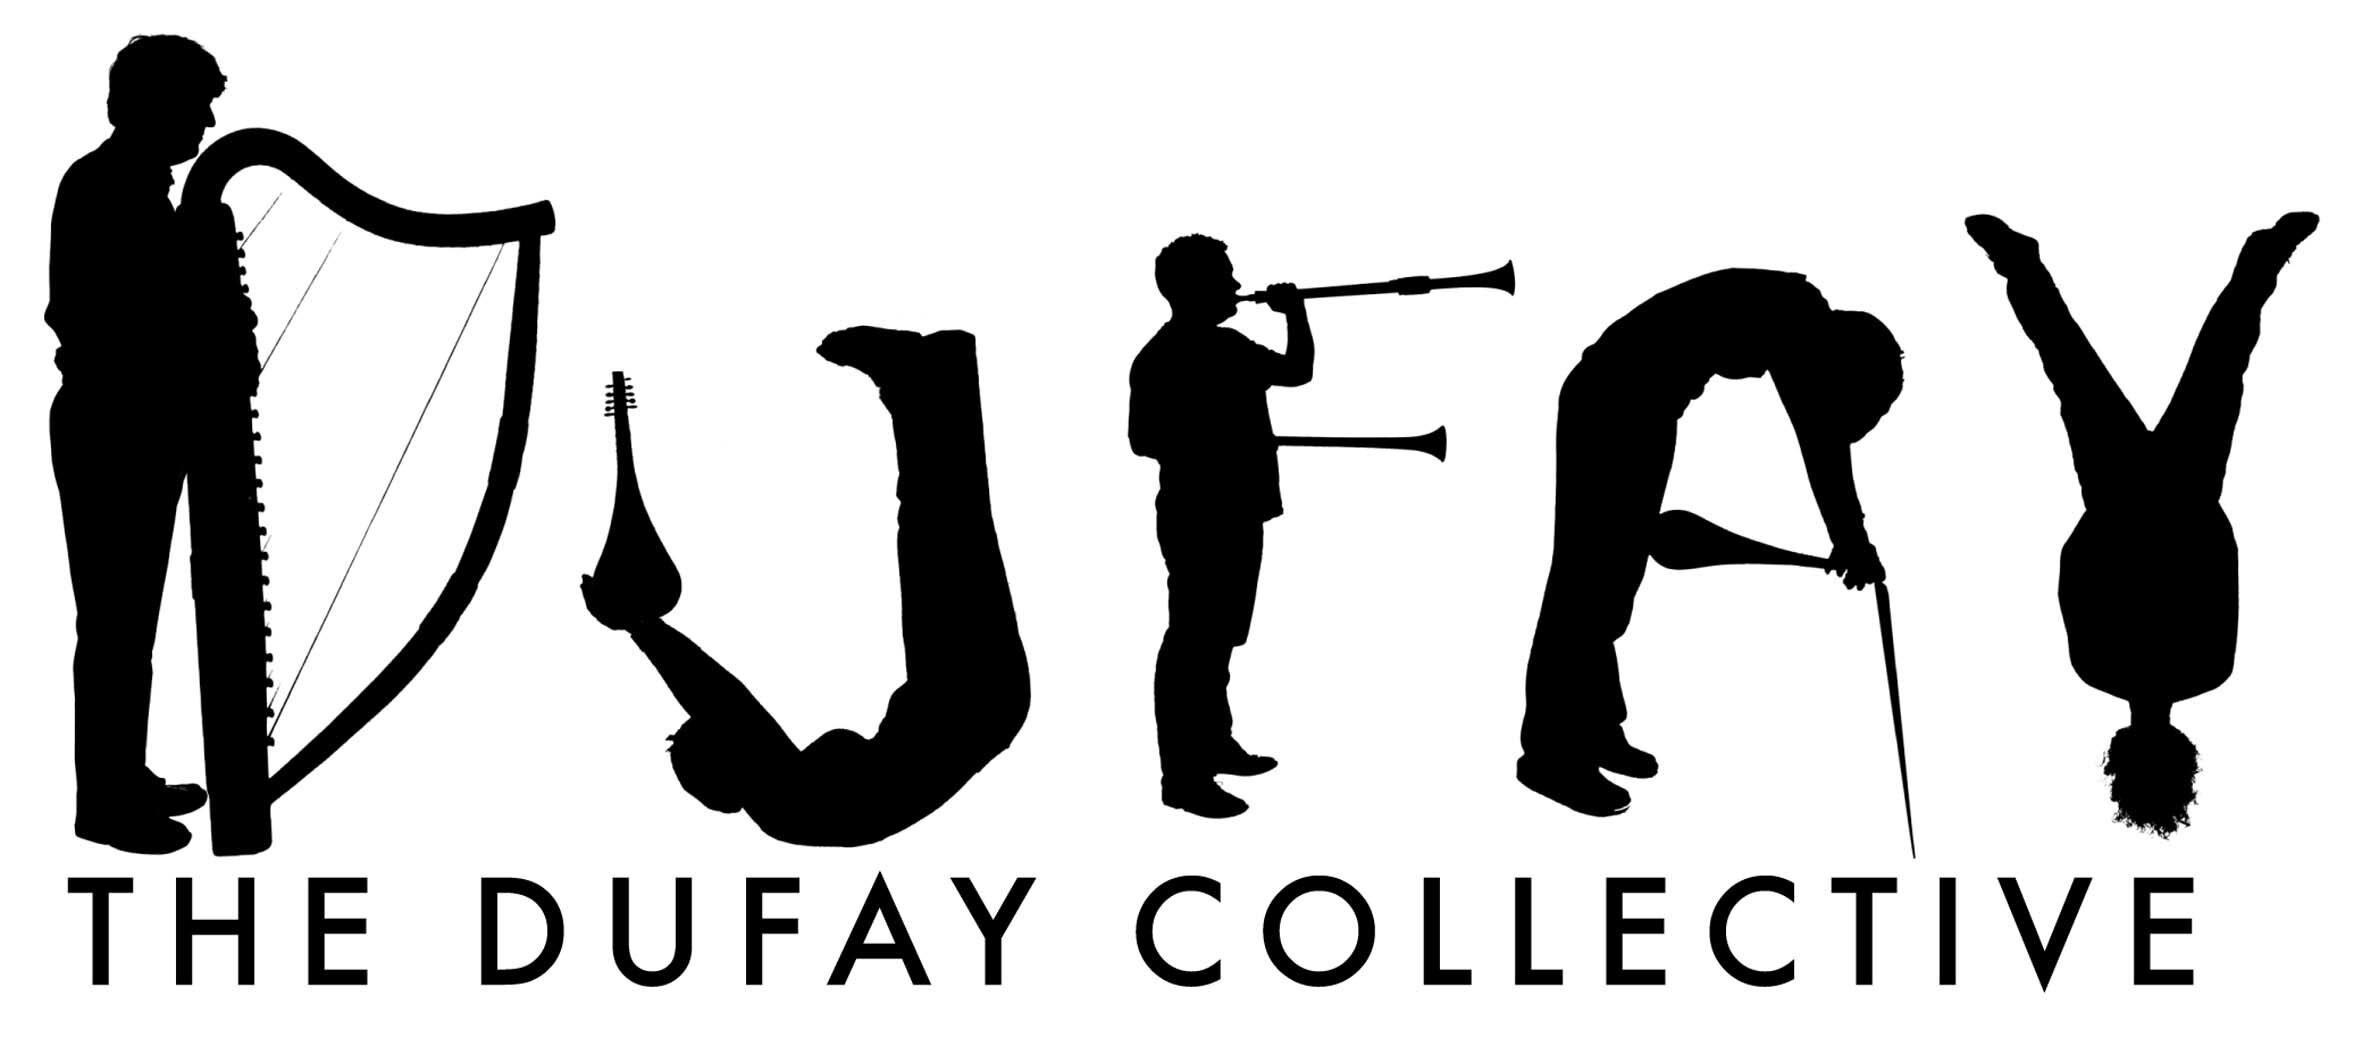 THE DUFAY COLLECTIVE